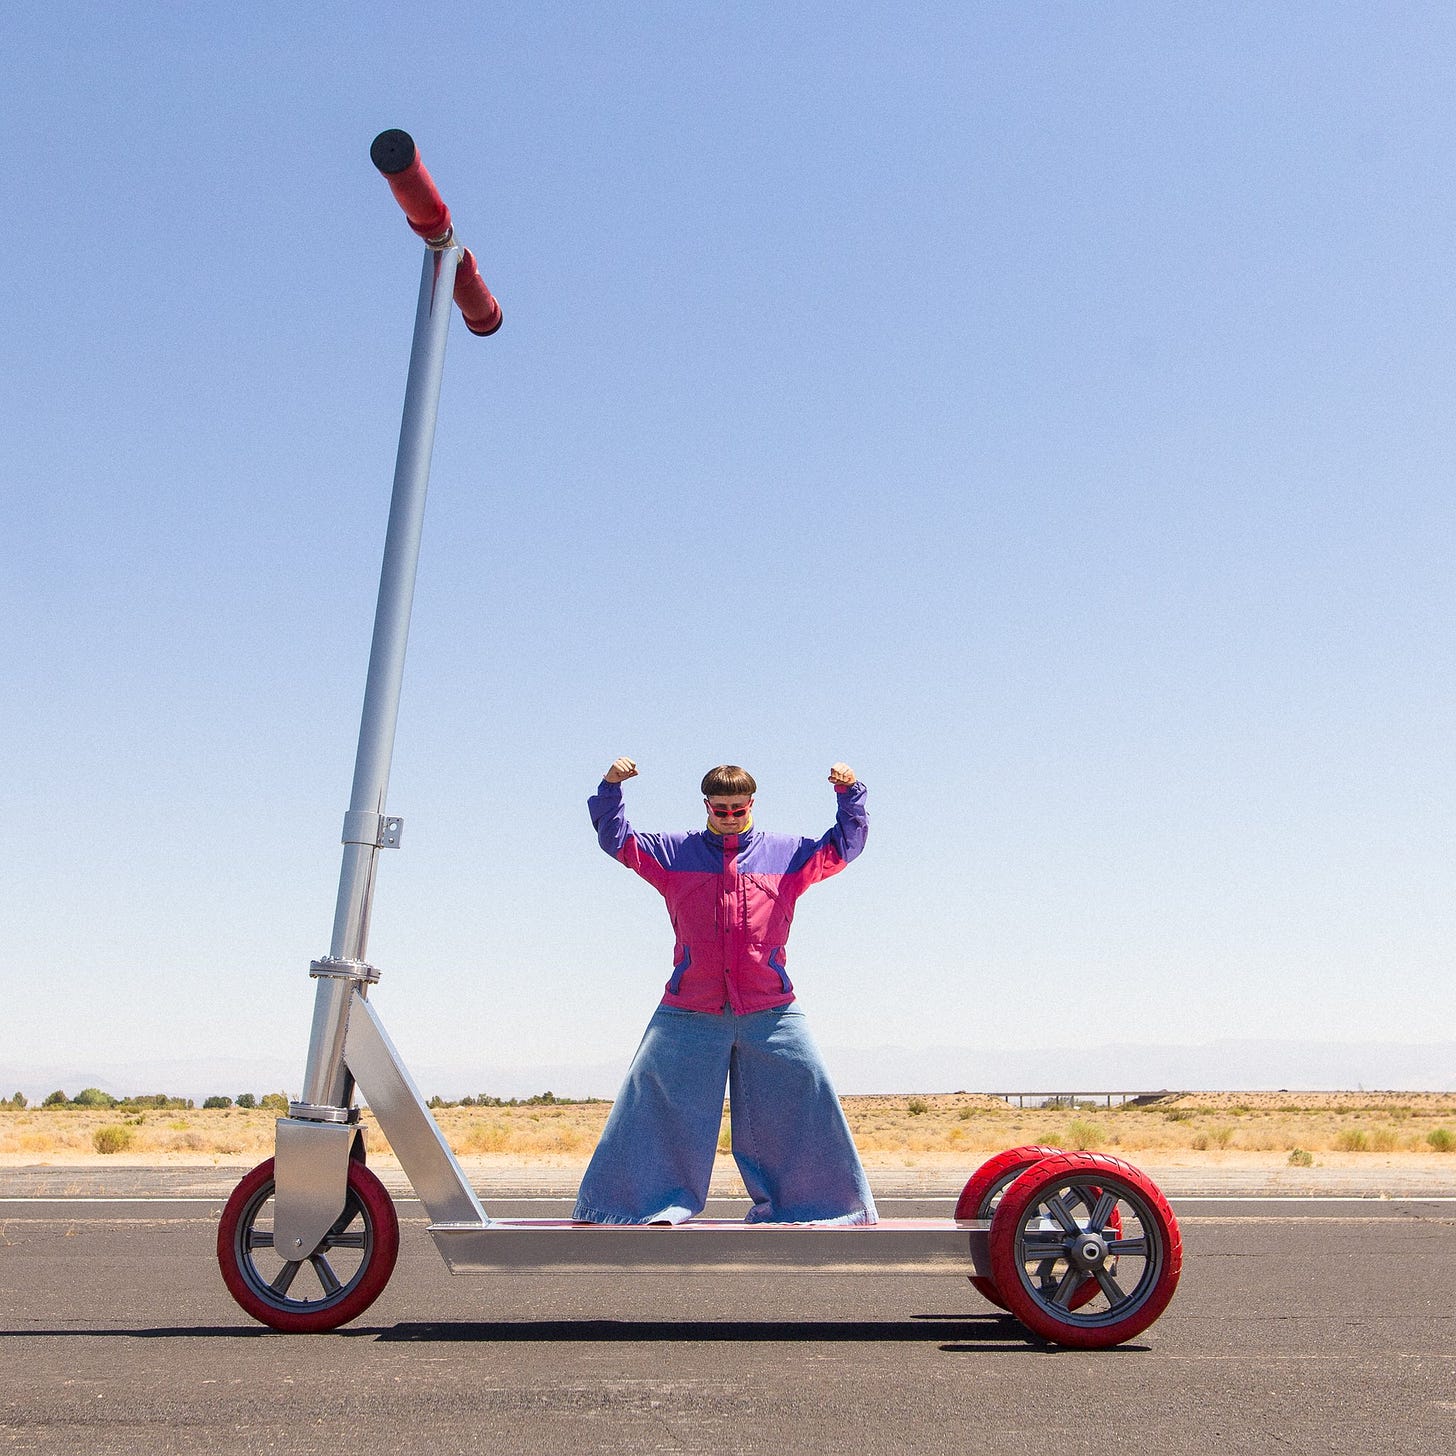 Oliver Tree on Twitter: "I spent the last few years secretly building the  worlds biggest scooter. Here's the deal y'all, if this post hits 500k  likes, I'll partner with Guinness World Records